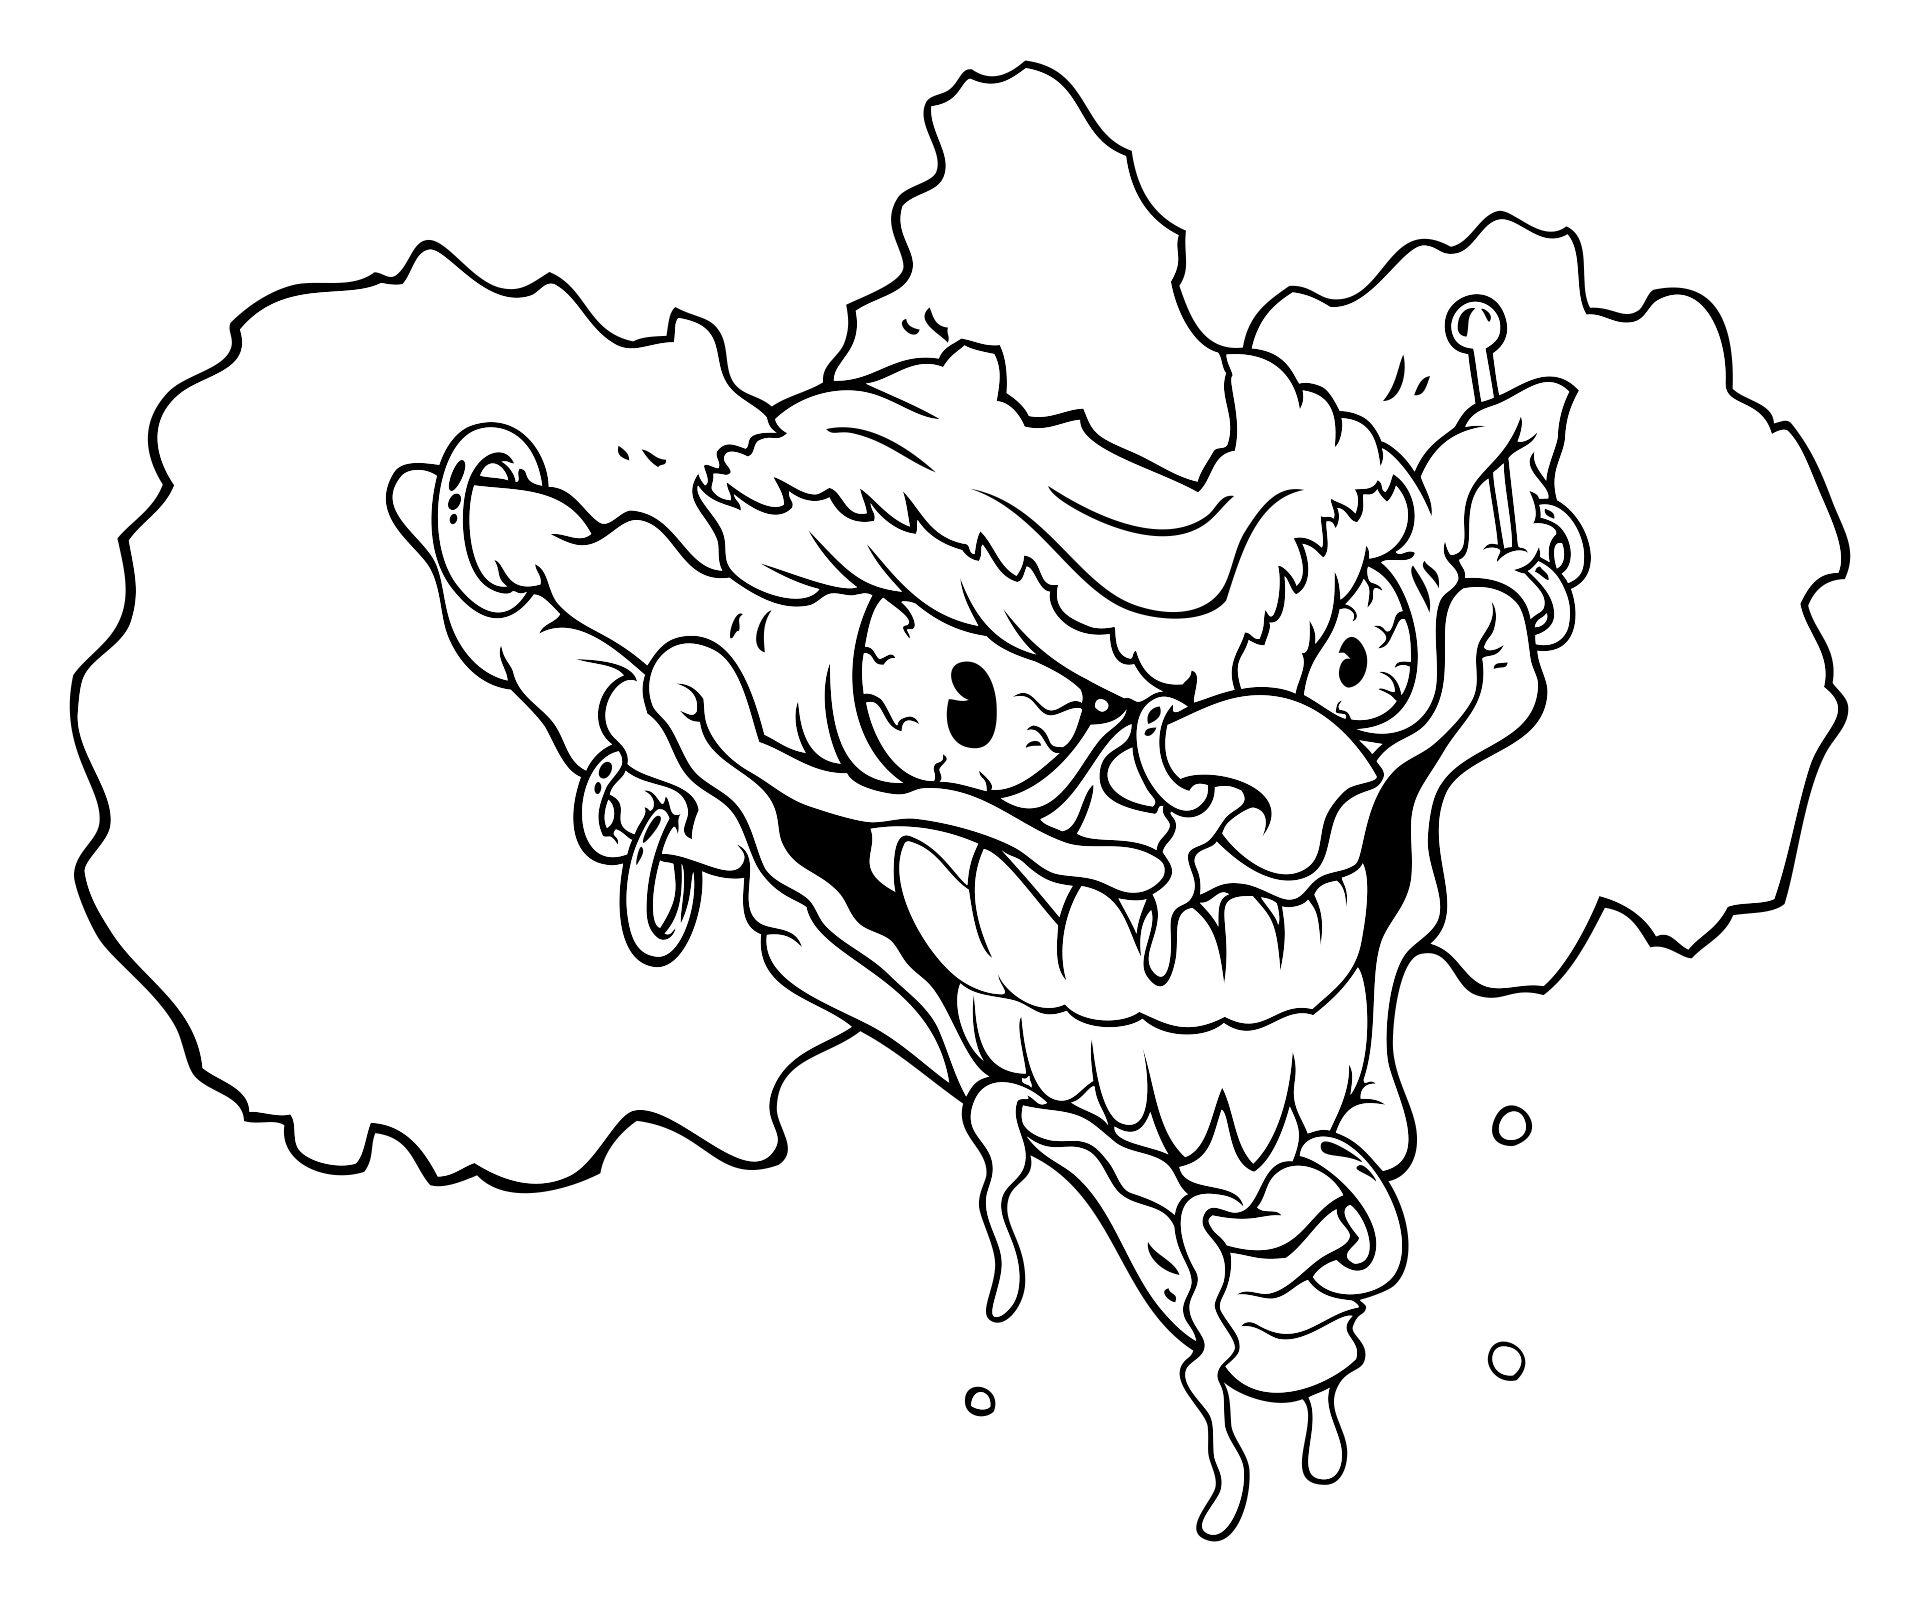 Printable Scary Clown Coloring Page For Adults